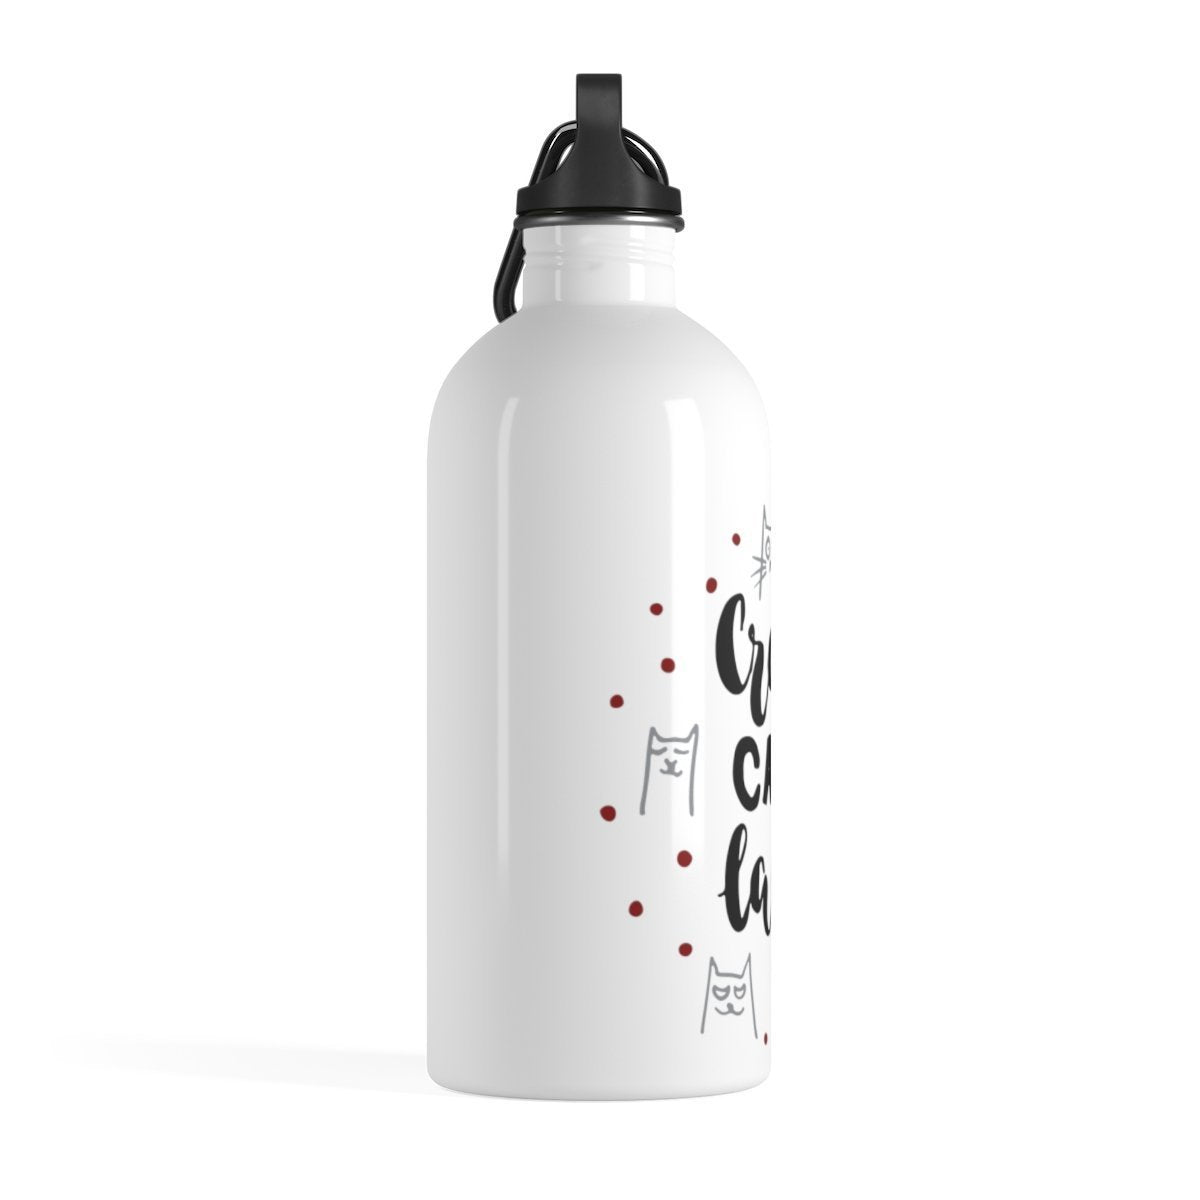 One of this crazy cat lady store's favorite accessories, this cat water bottle features the phrase "Crazy Cat Lady" printed in black.